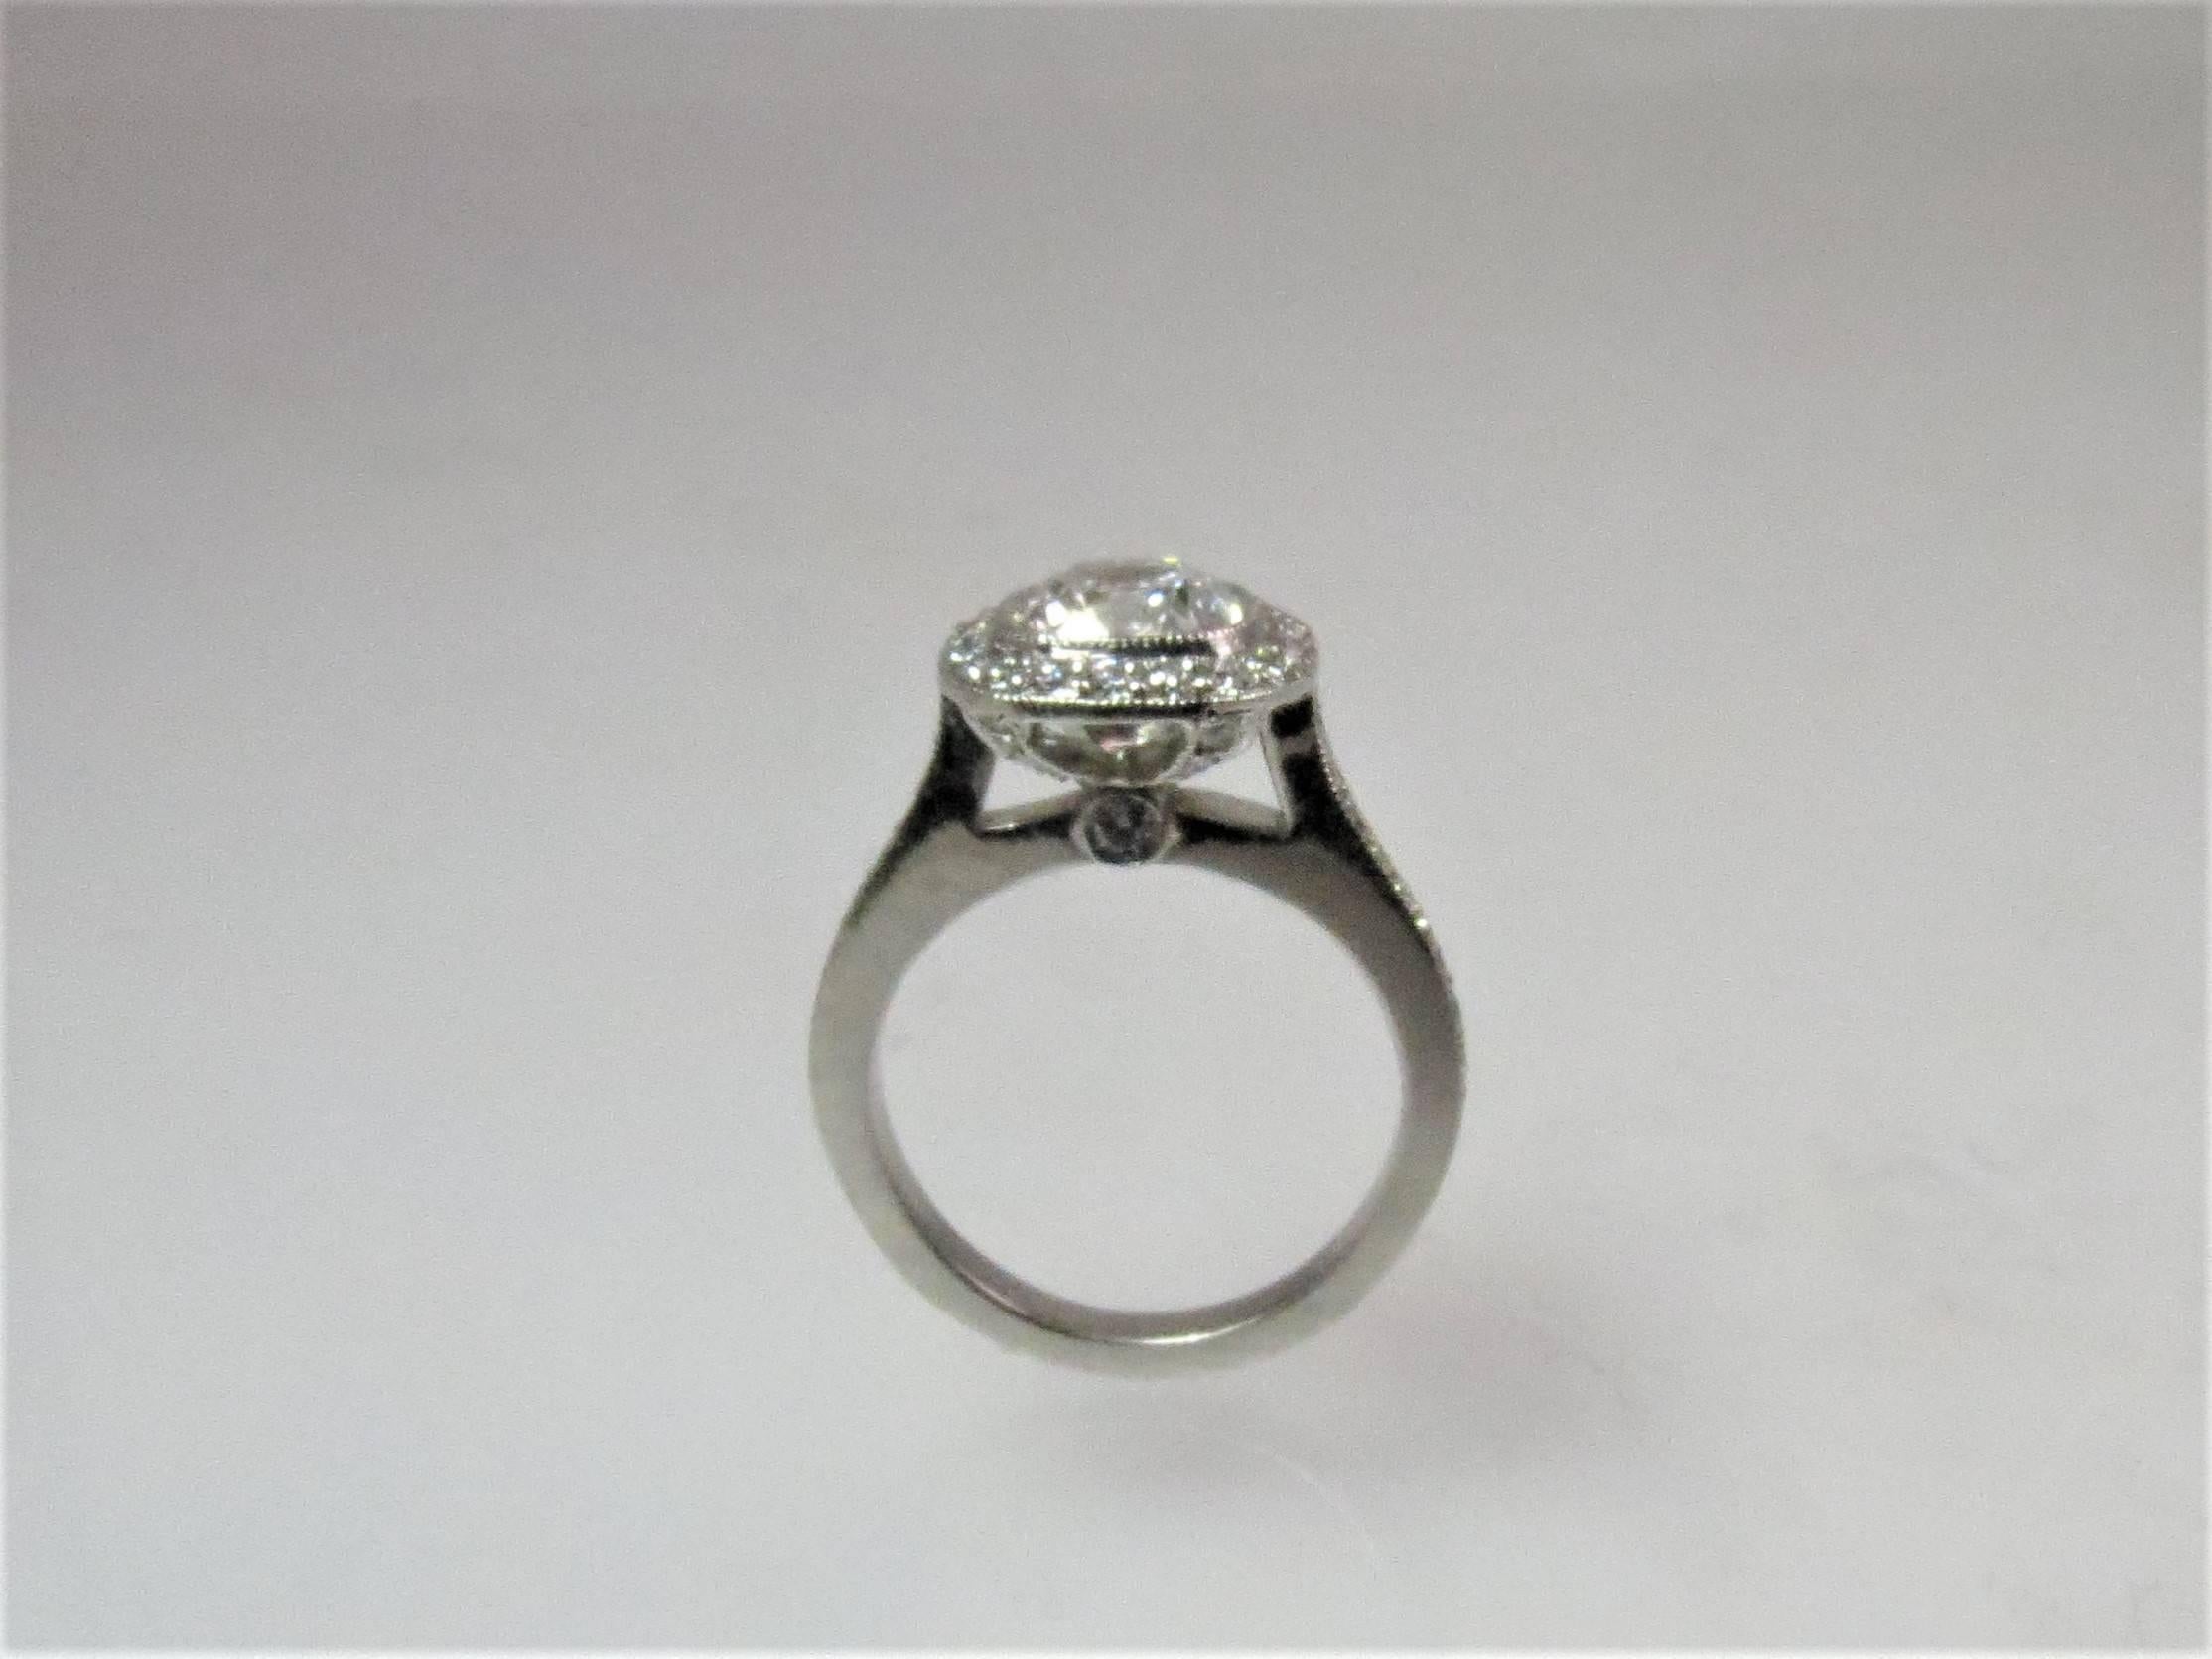 Cushion Cut 1.36 Carat Cushion Diamond, GIA Certified I, VS2 in Platinum Halo Ring Mounting For Sale